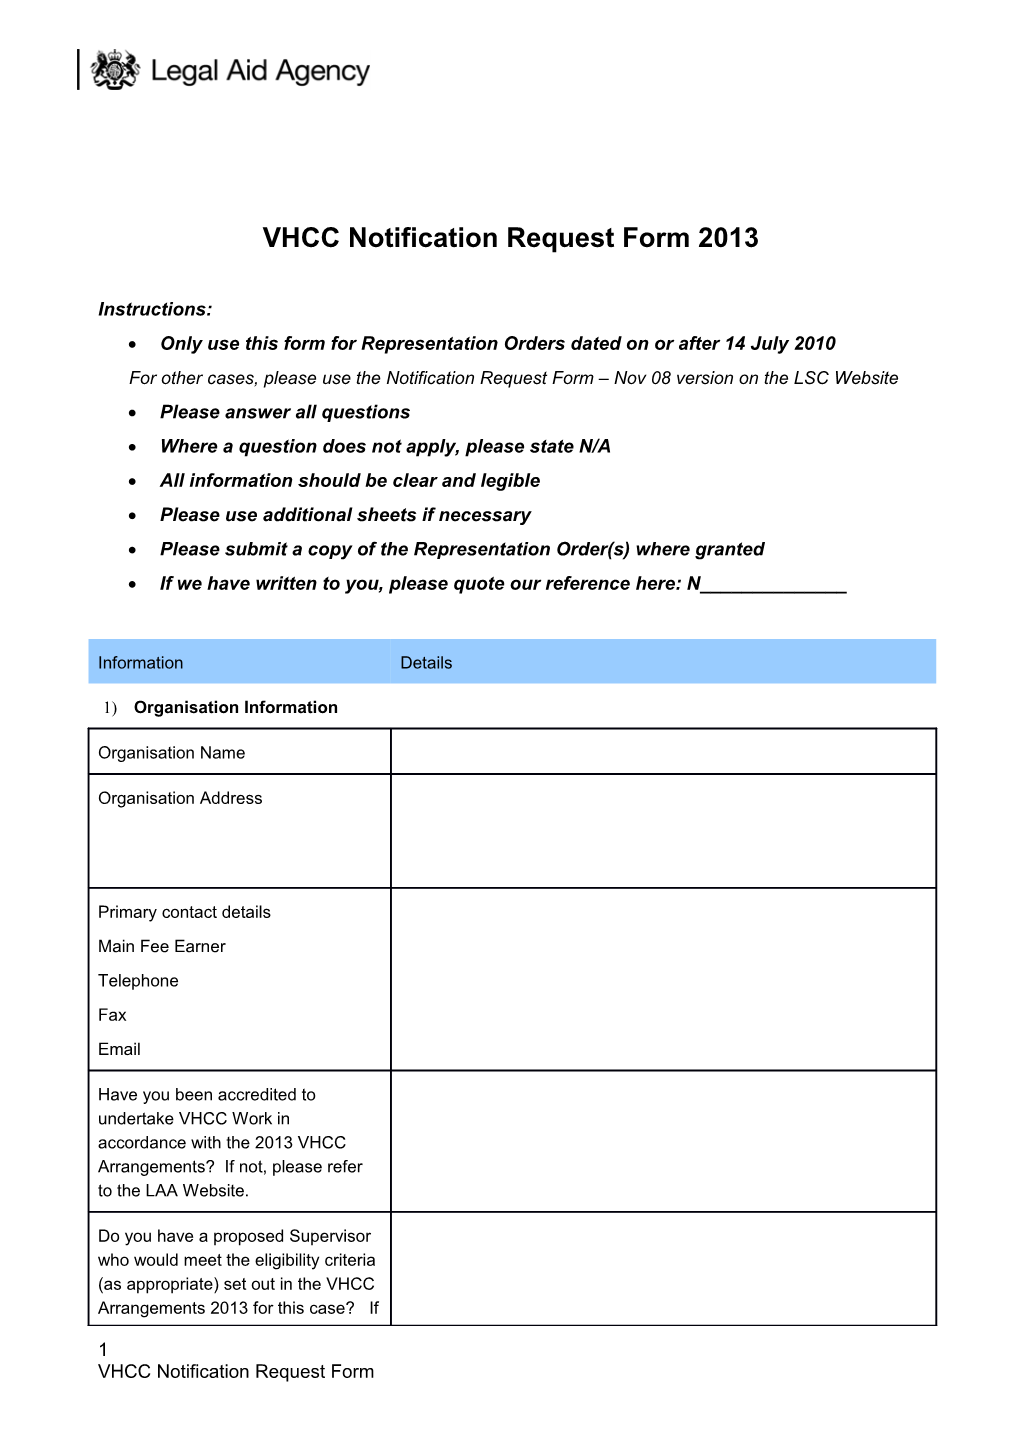 VHCC Notification Request Form 2013